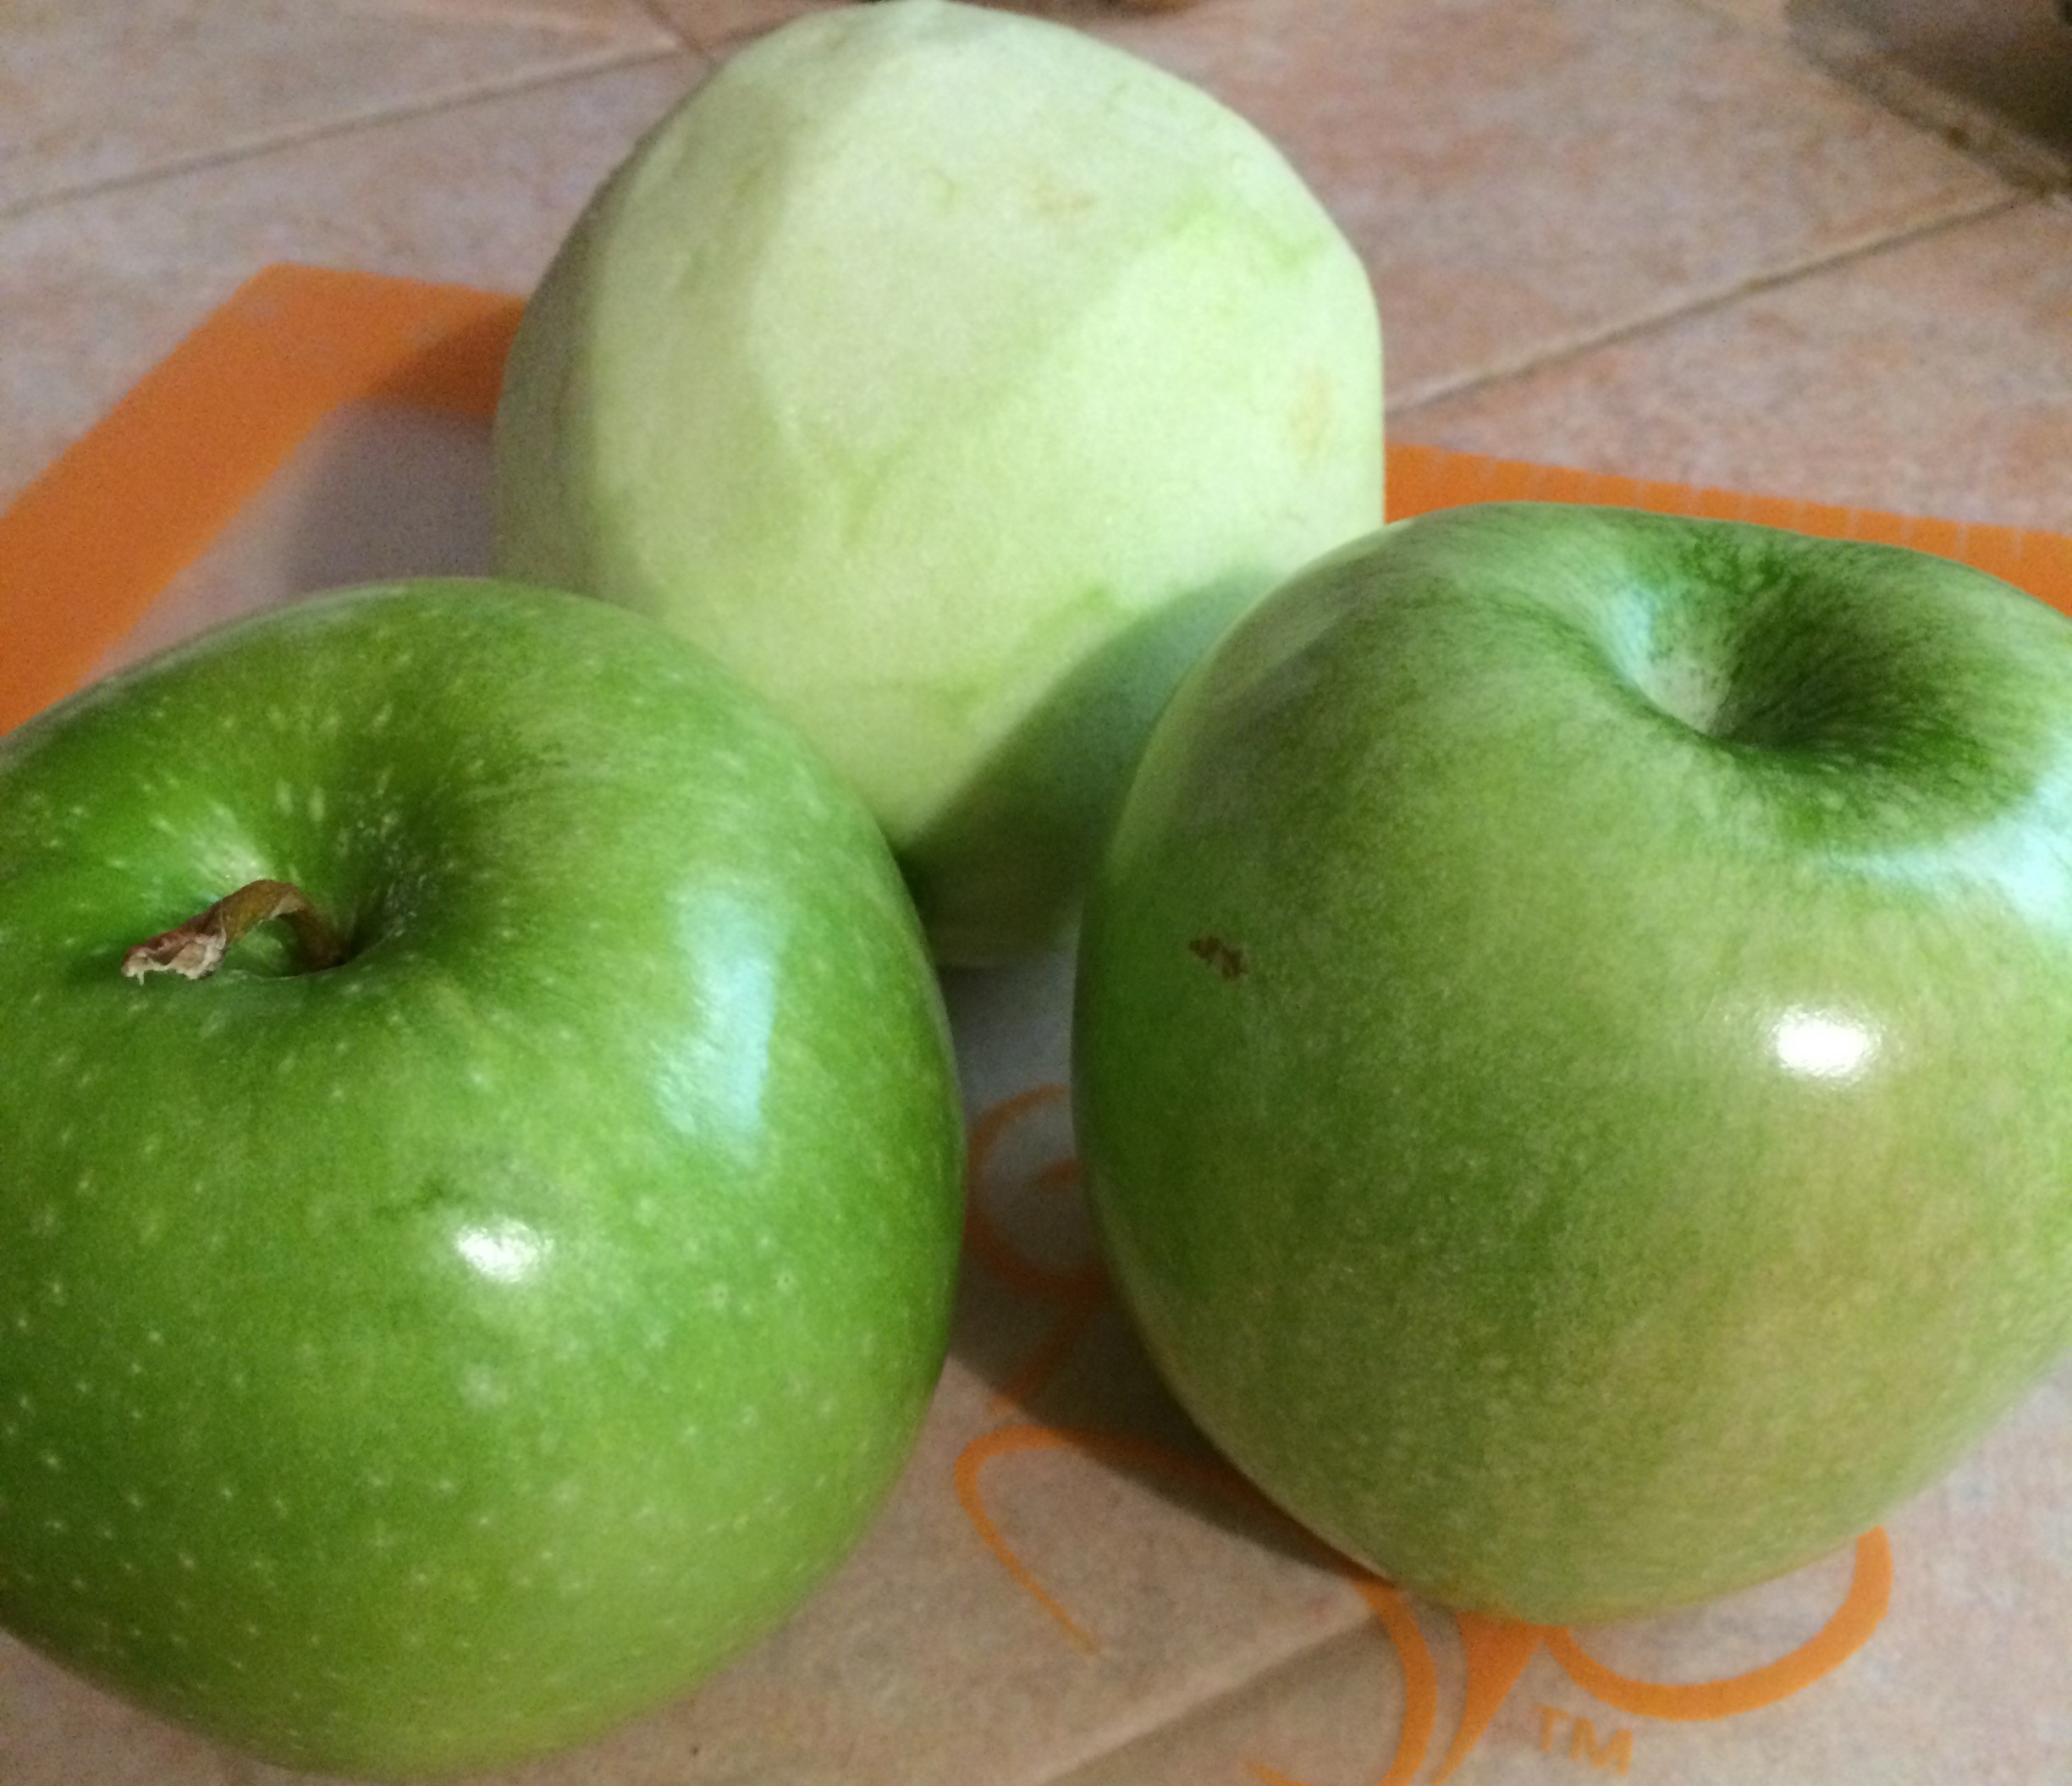 Here were my apples. They were actually fairly large...I'm not sure if you can tell.